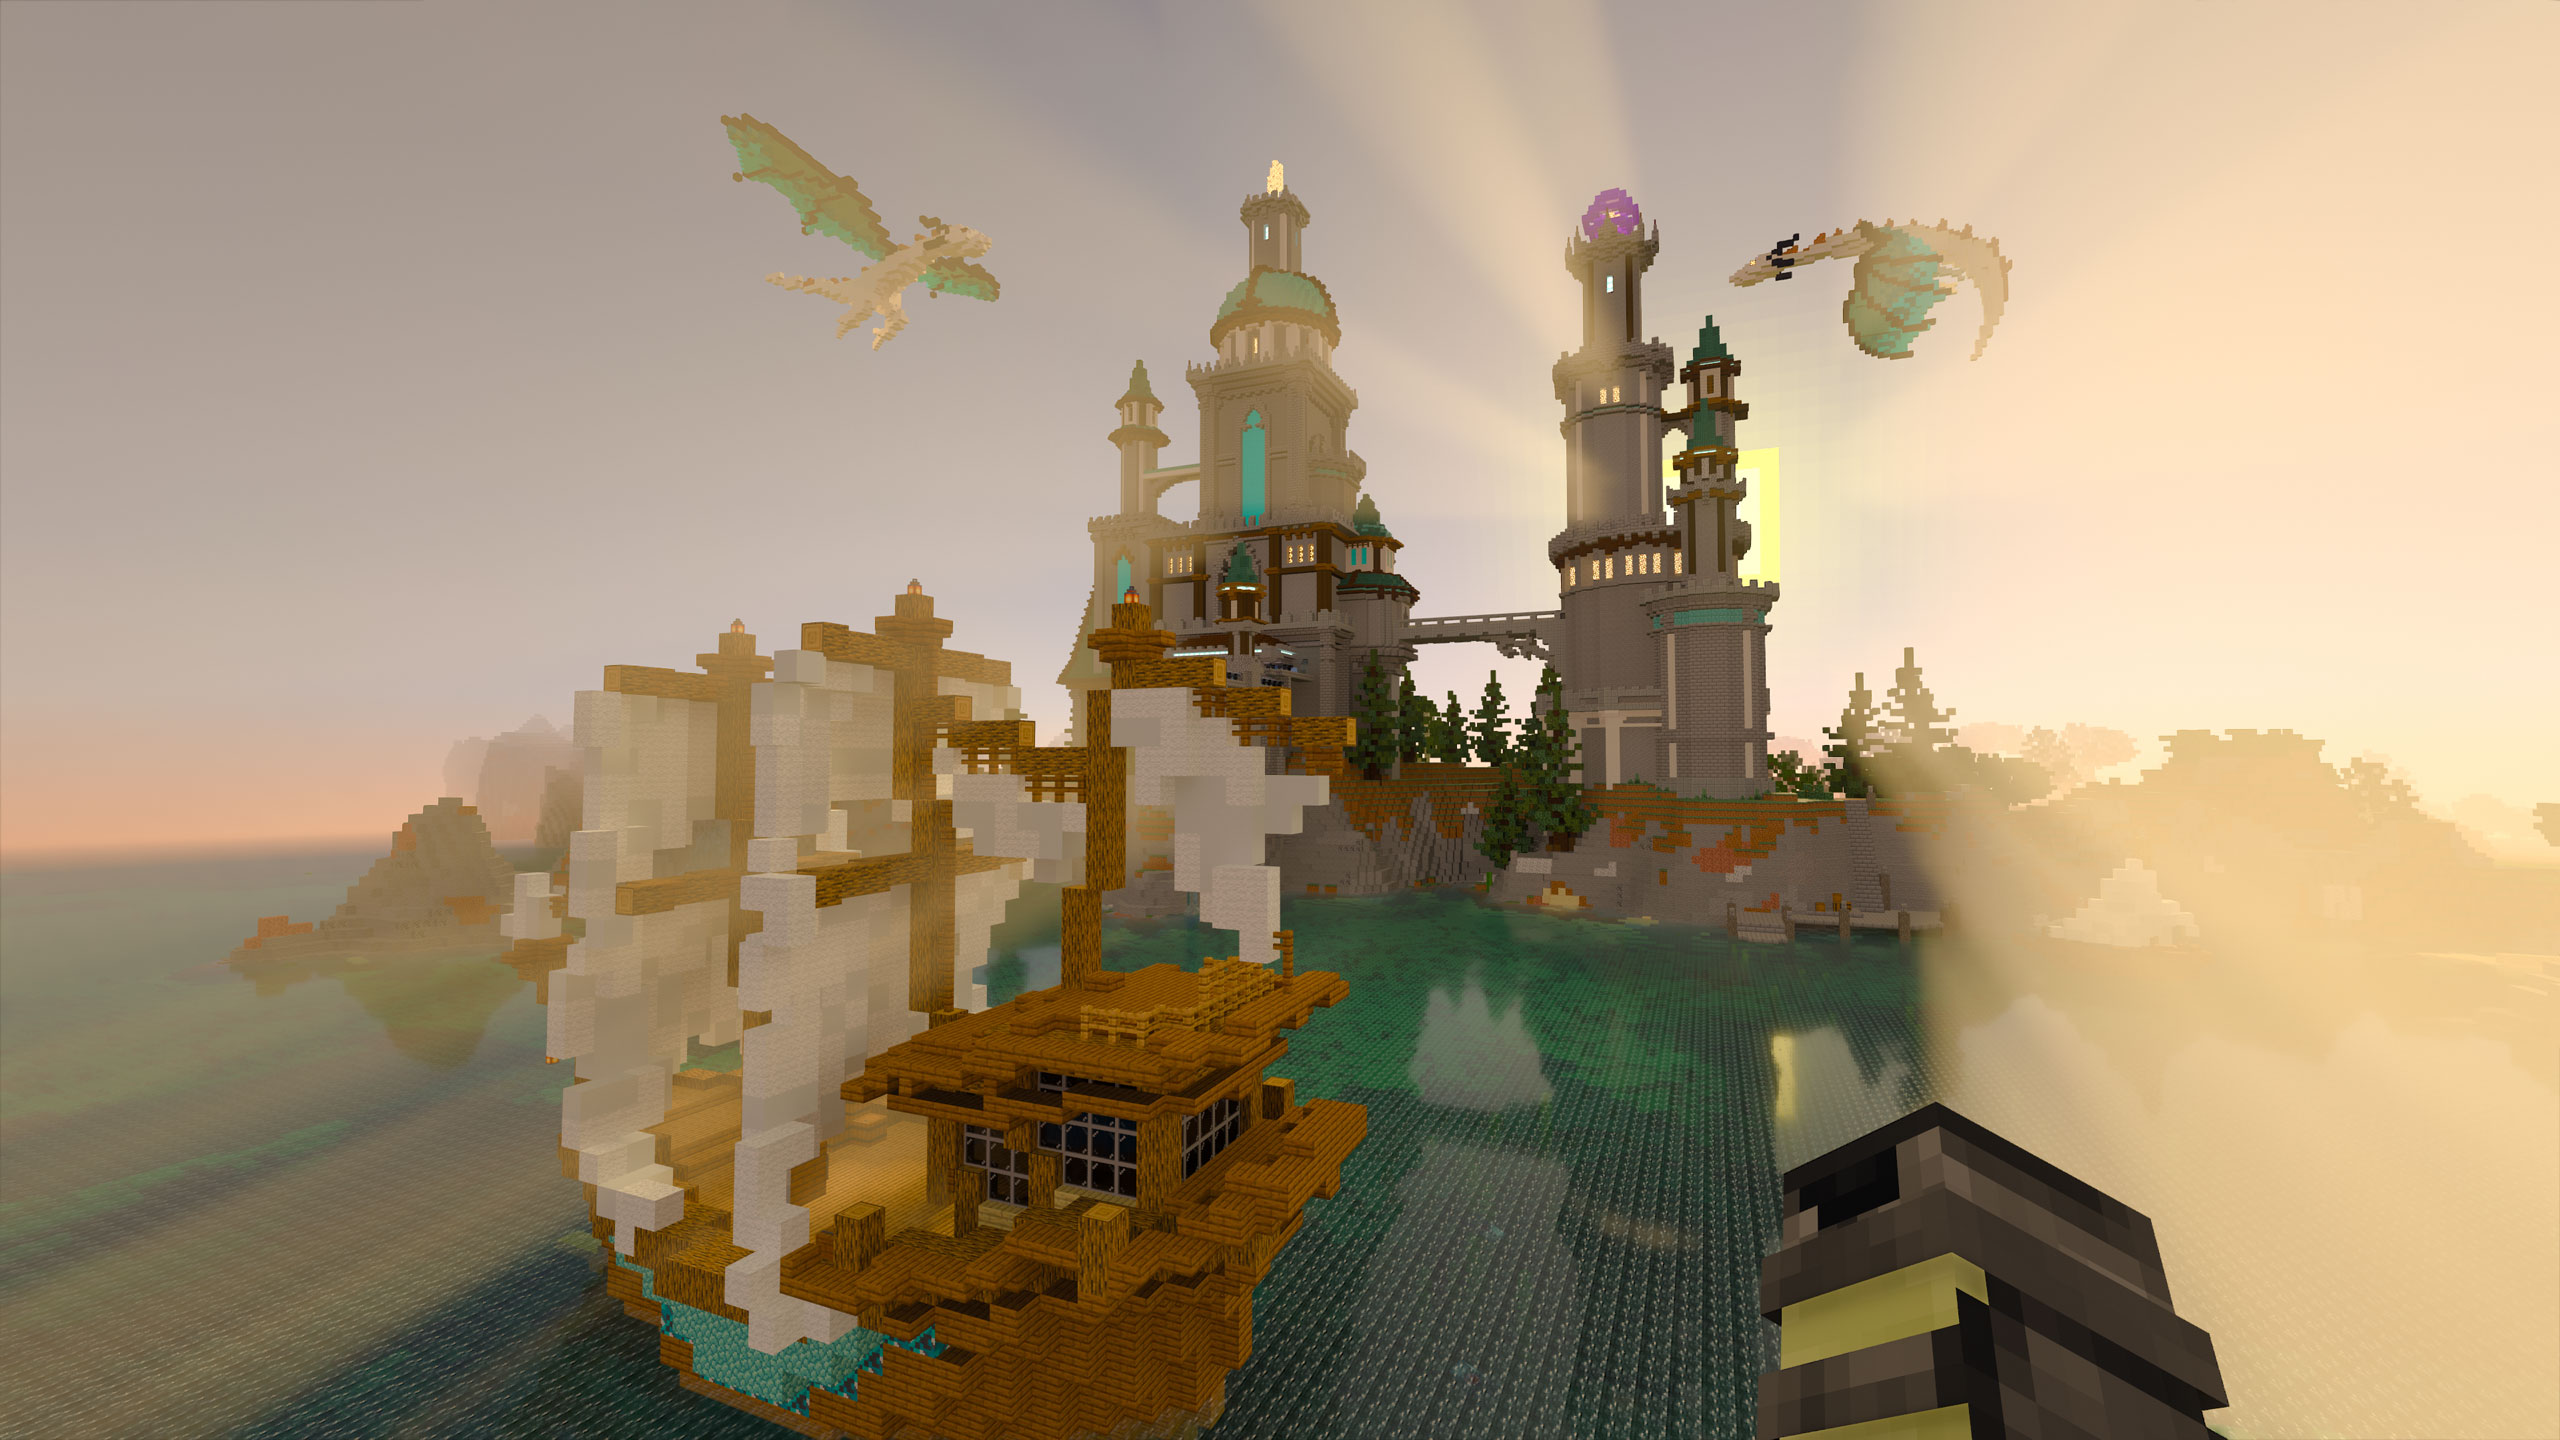 God rays, real-time shadows, reflective water and more; Minecraft has never looked so good.